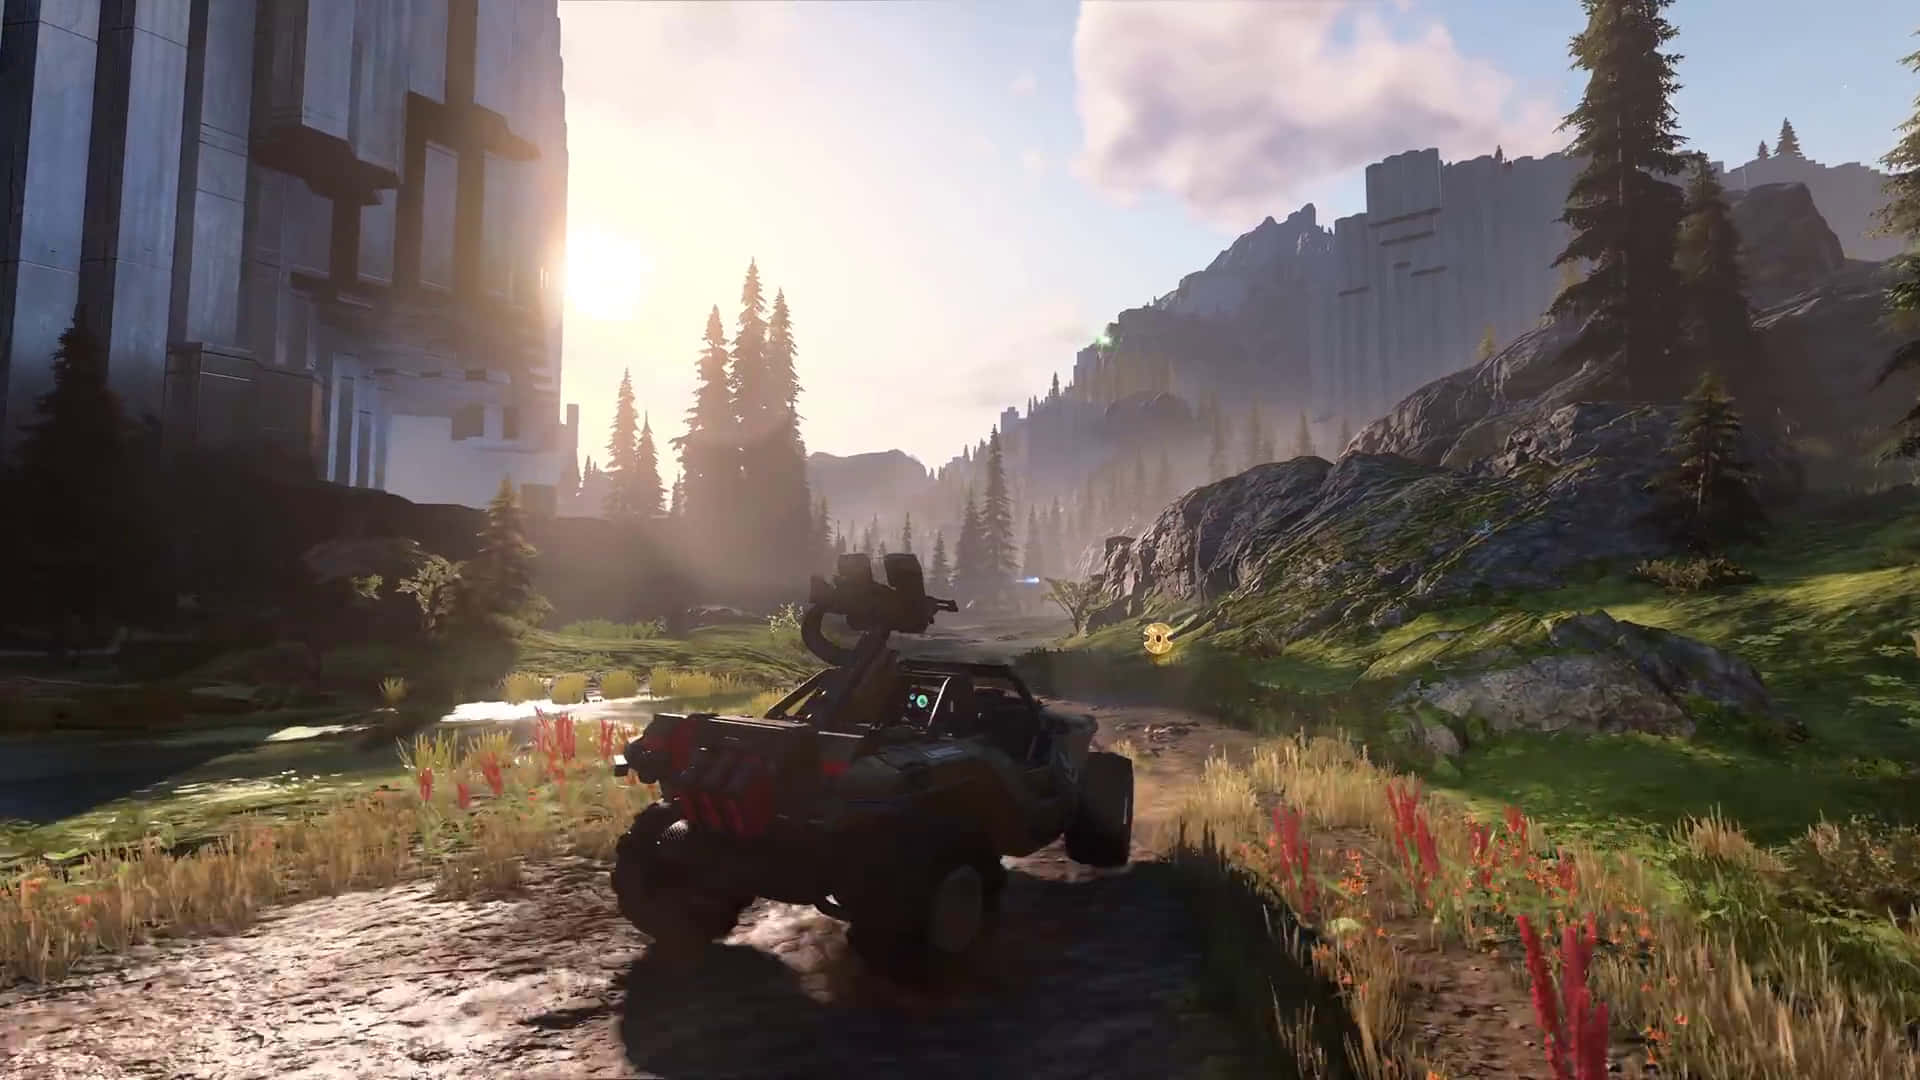 A Screenshot Of A Game With A Quad Bike And A Mountain